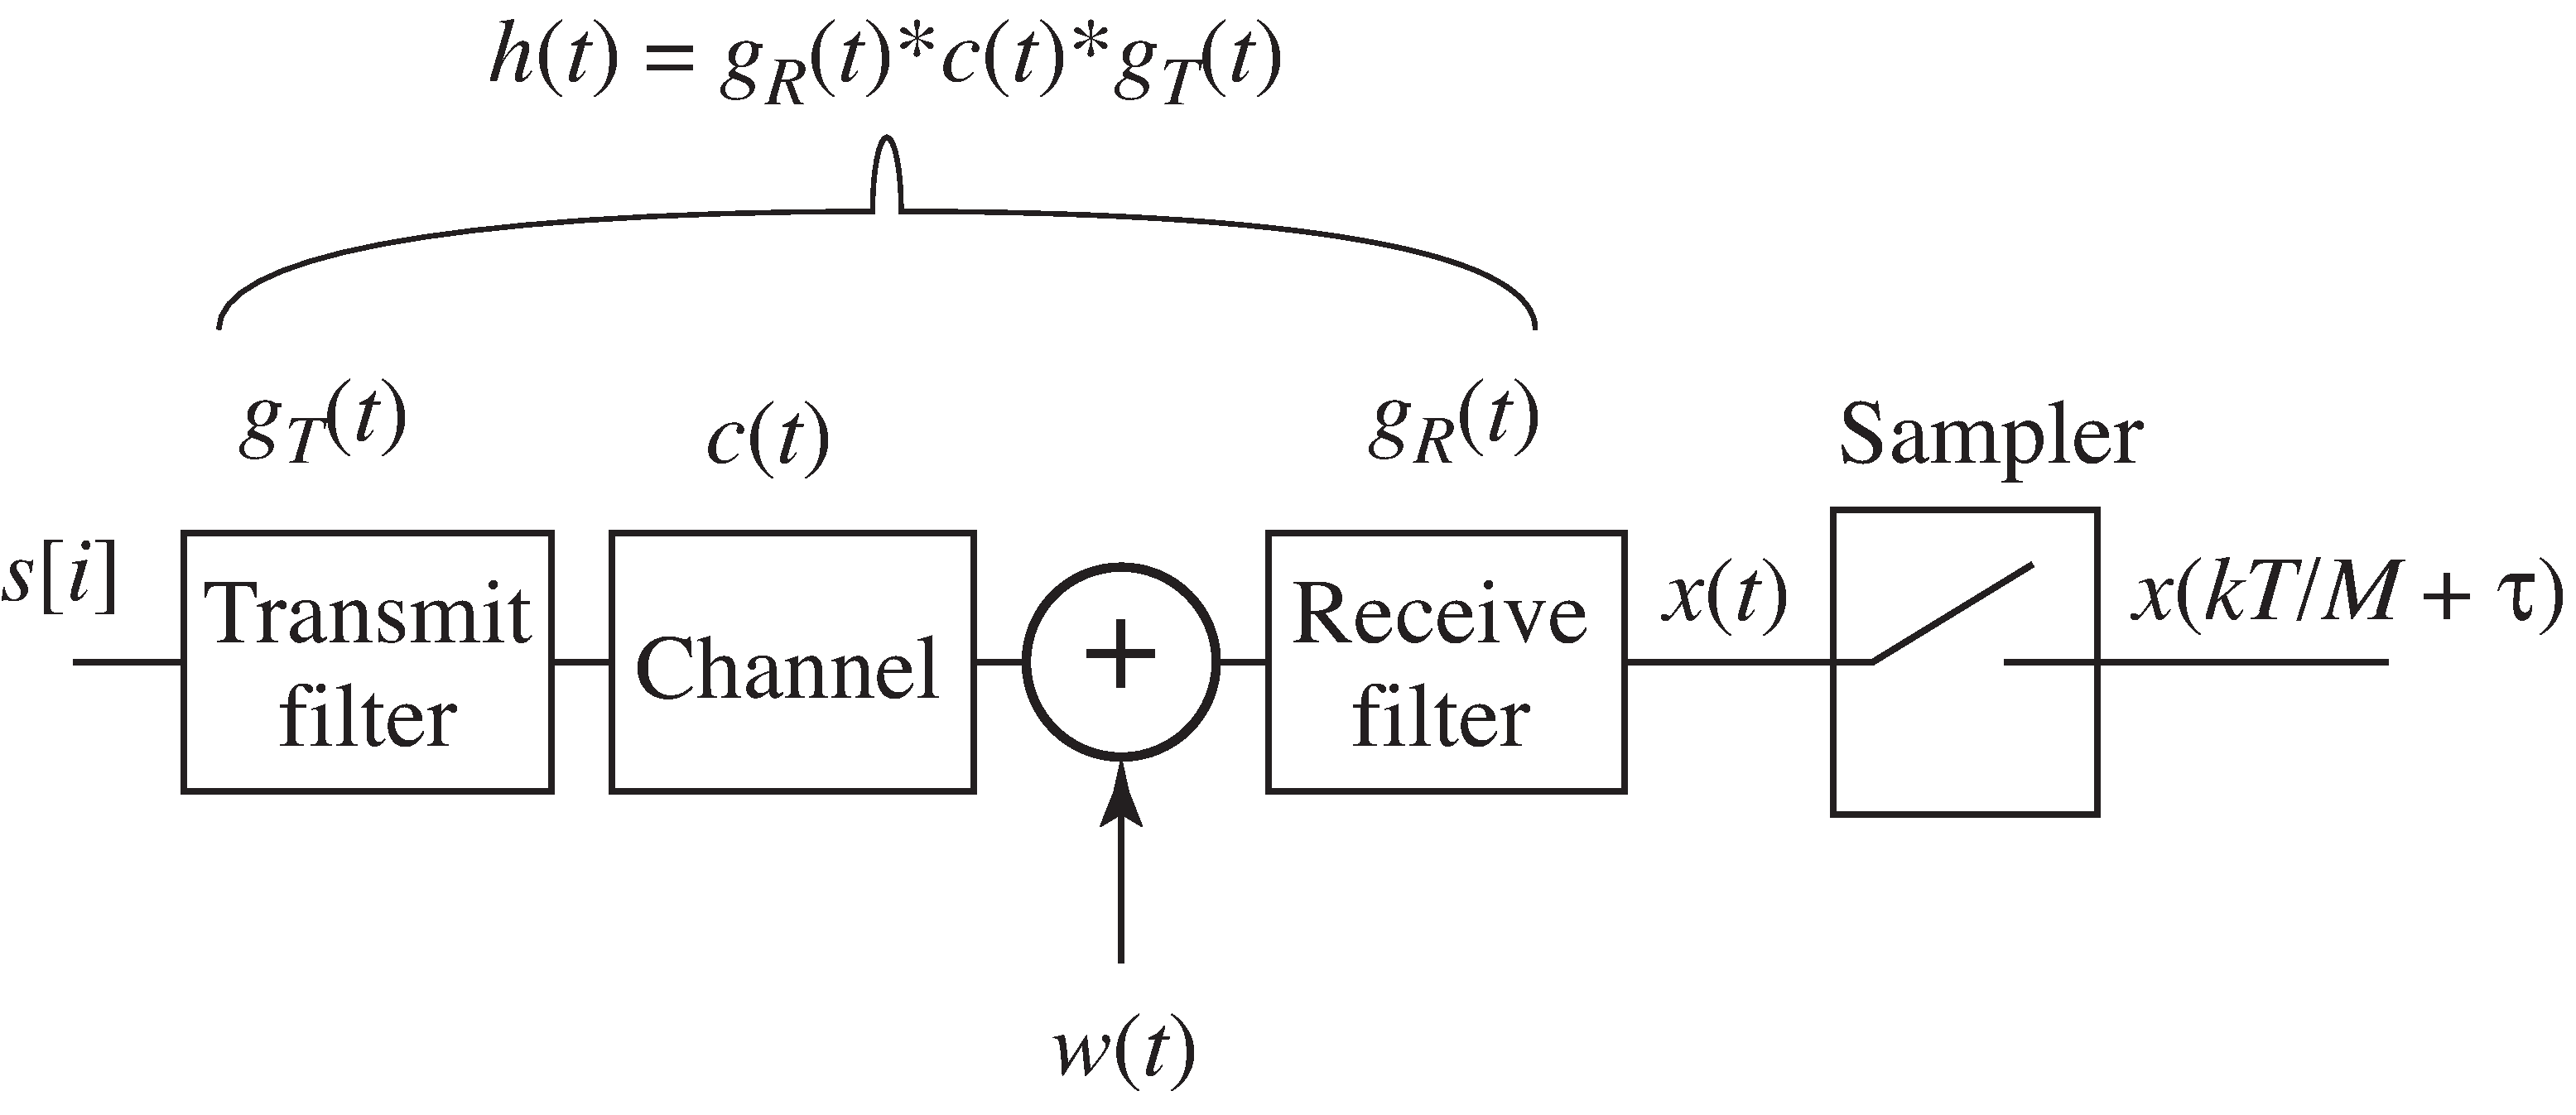 The transfer function h combines the effects of the transmitter pulse shaping g_T, the channel c, and the receive filter g_R.